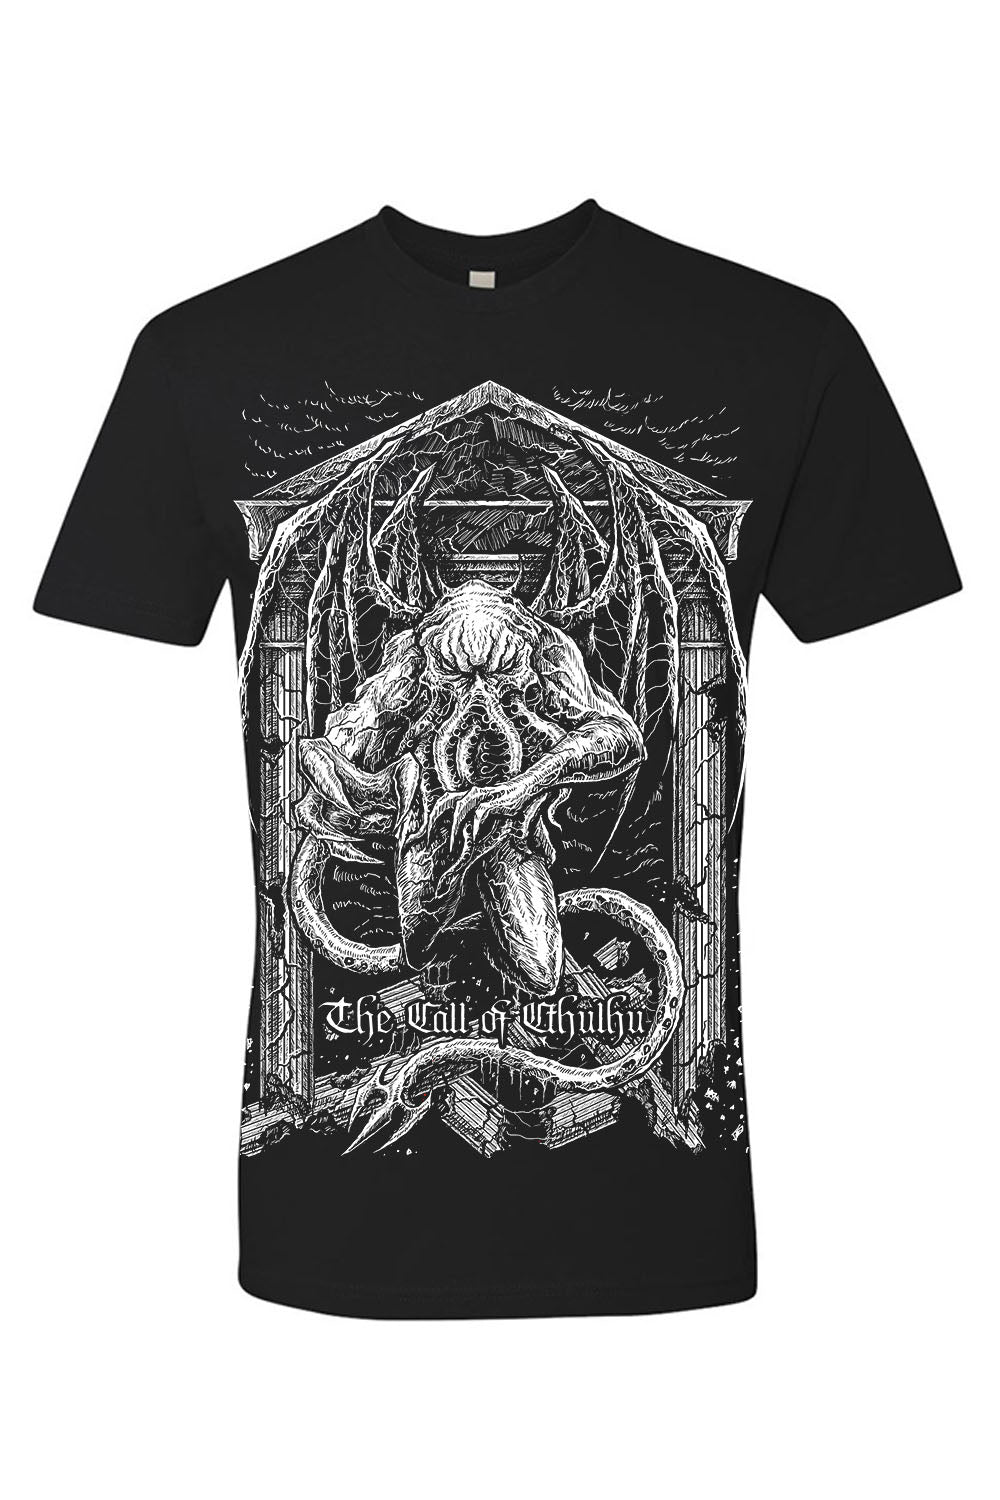 The Call of Cthulhu T-shirt